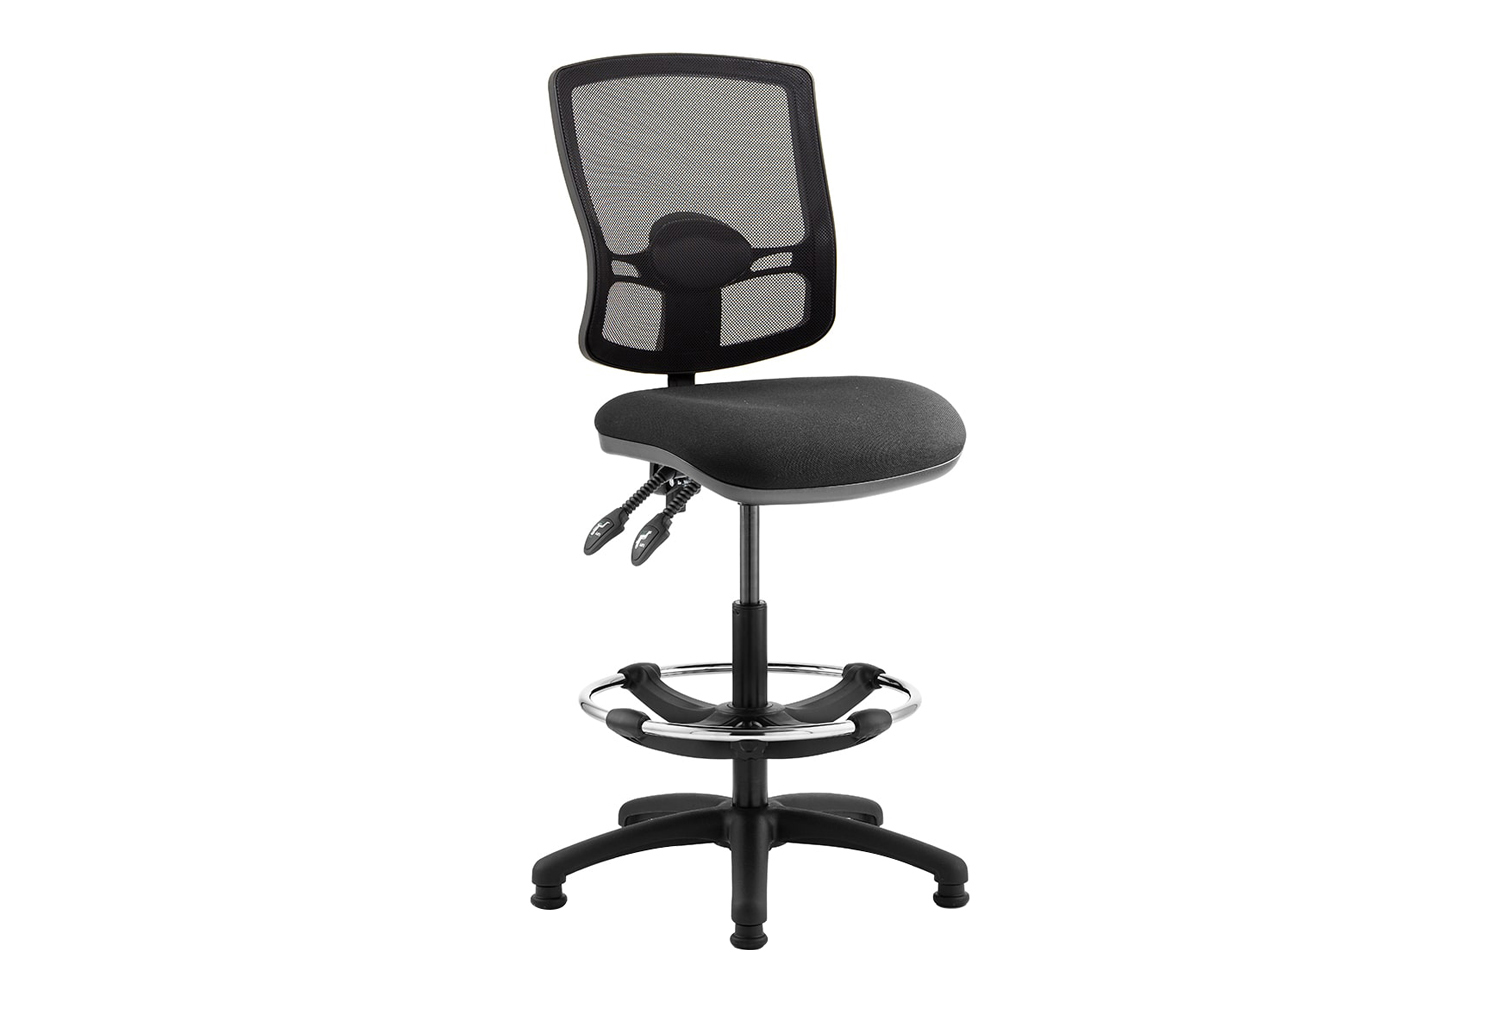 Lunar Plus 2 Lever Deluxe Mesh Back Draughtsman Office Chair With No Arms, Black, Express Delivery